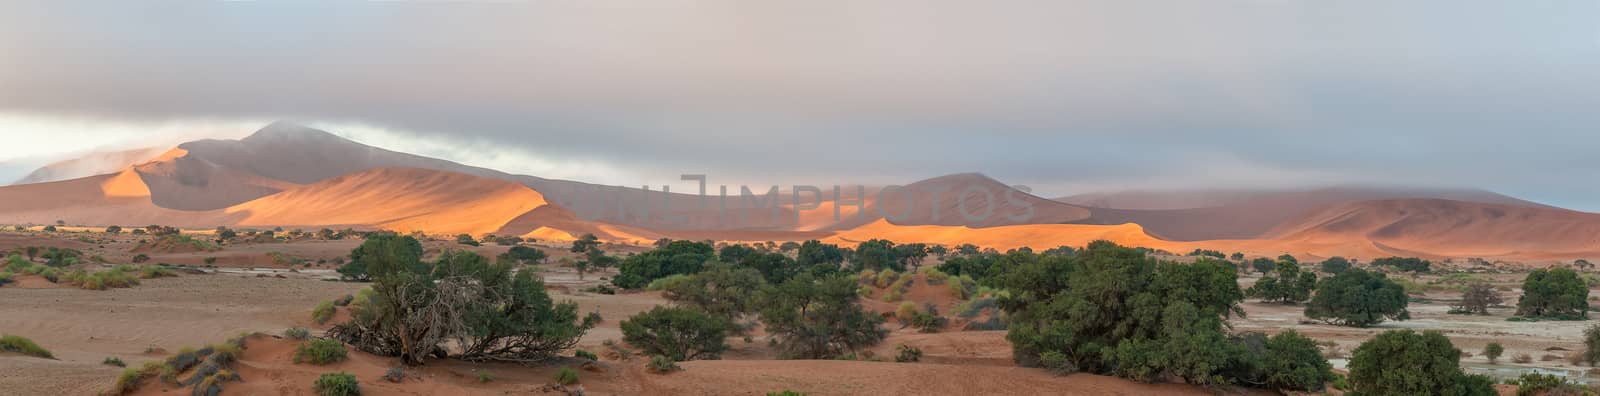 Panoramic view from Sossusvlei towards Deadvlei by dpreezg